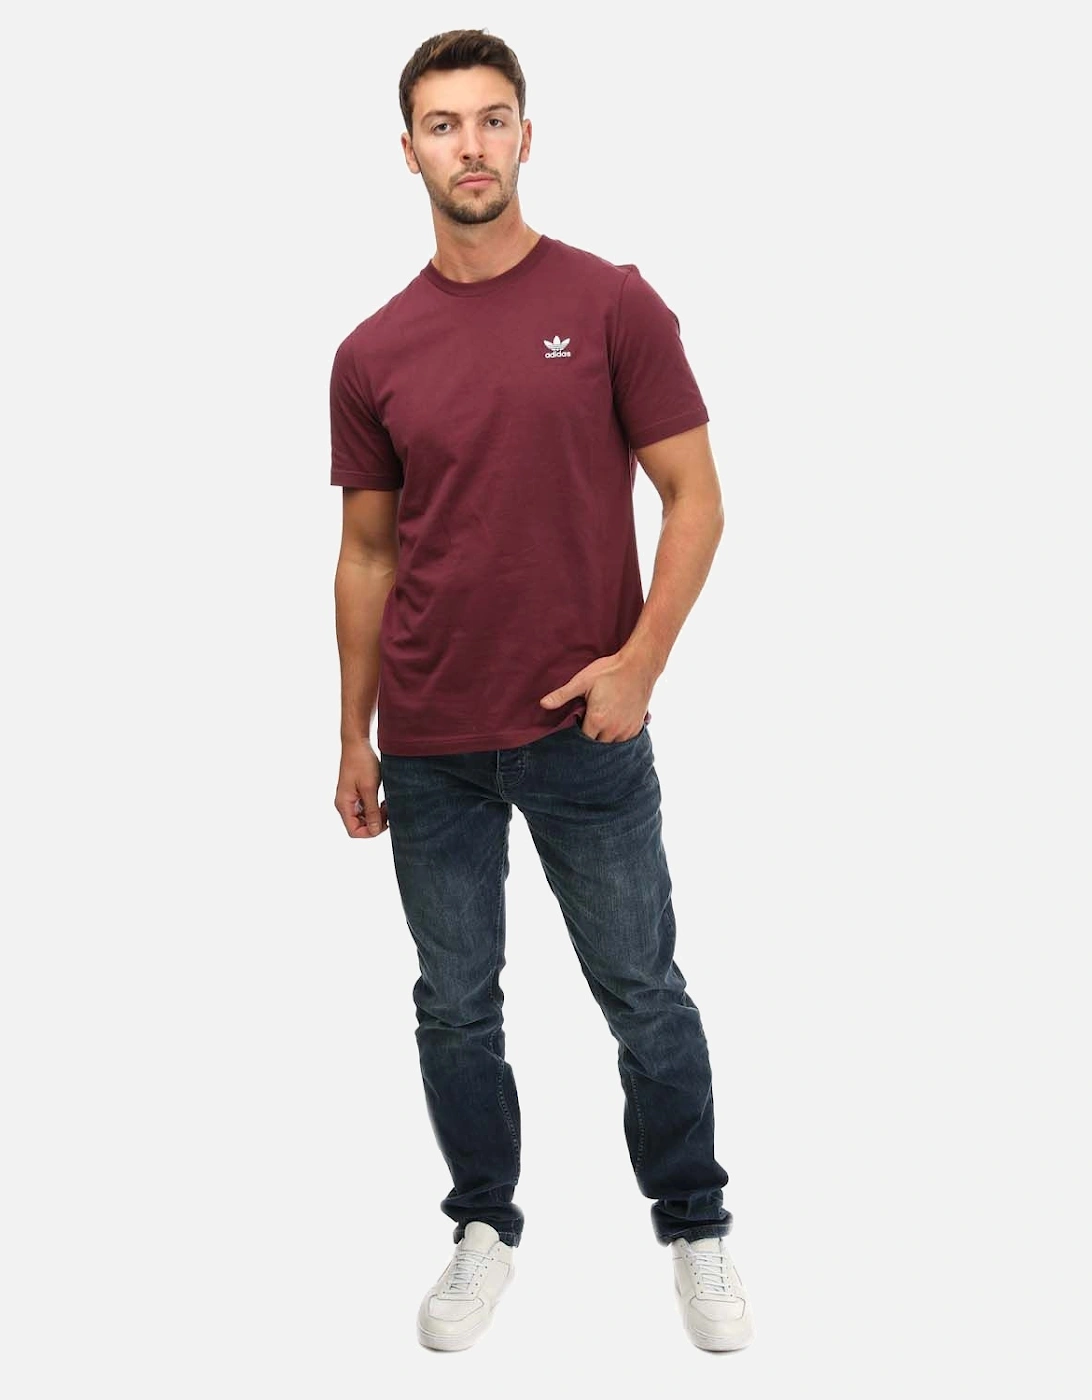 Mens Tapered Fit Jeans